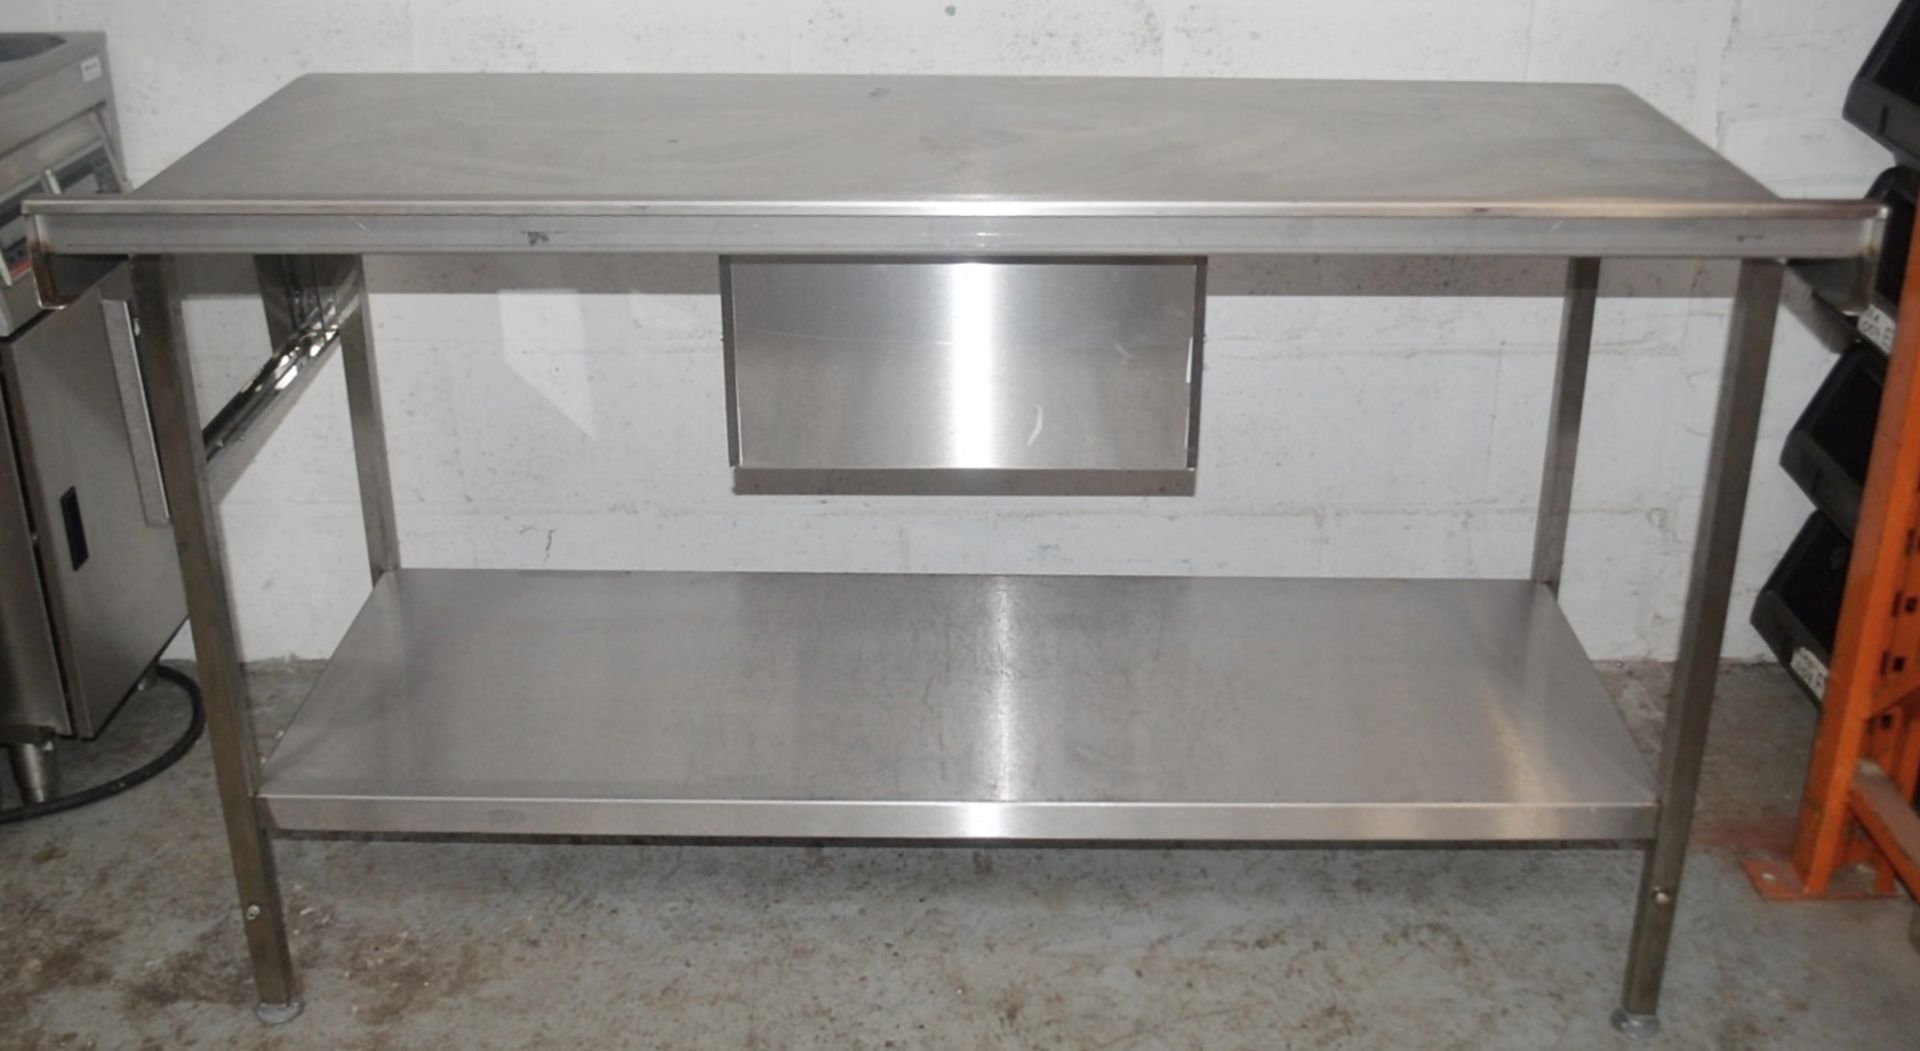 1 x Stainless Steel Commercial Kitchen Prep Counter With Drawer And Upstand - Dimensions: H86 x W150 - Image 5 of 5